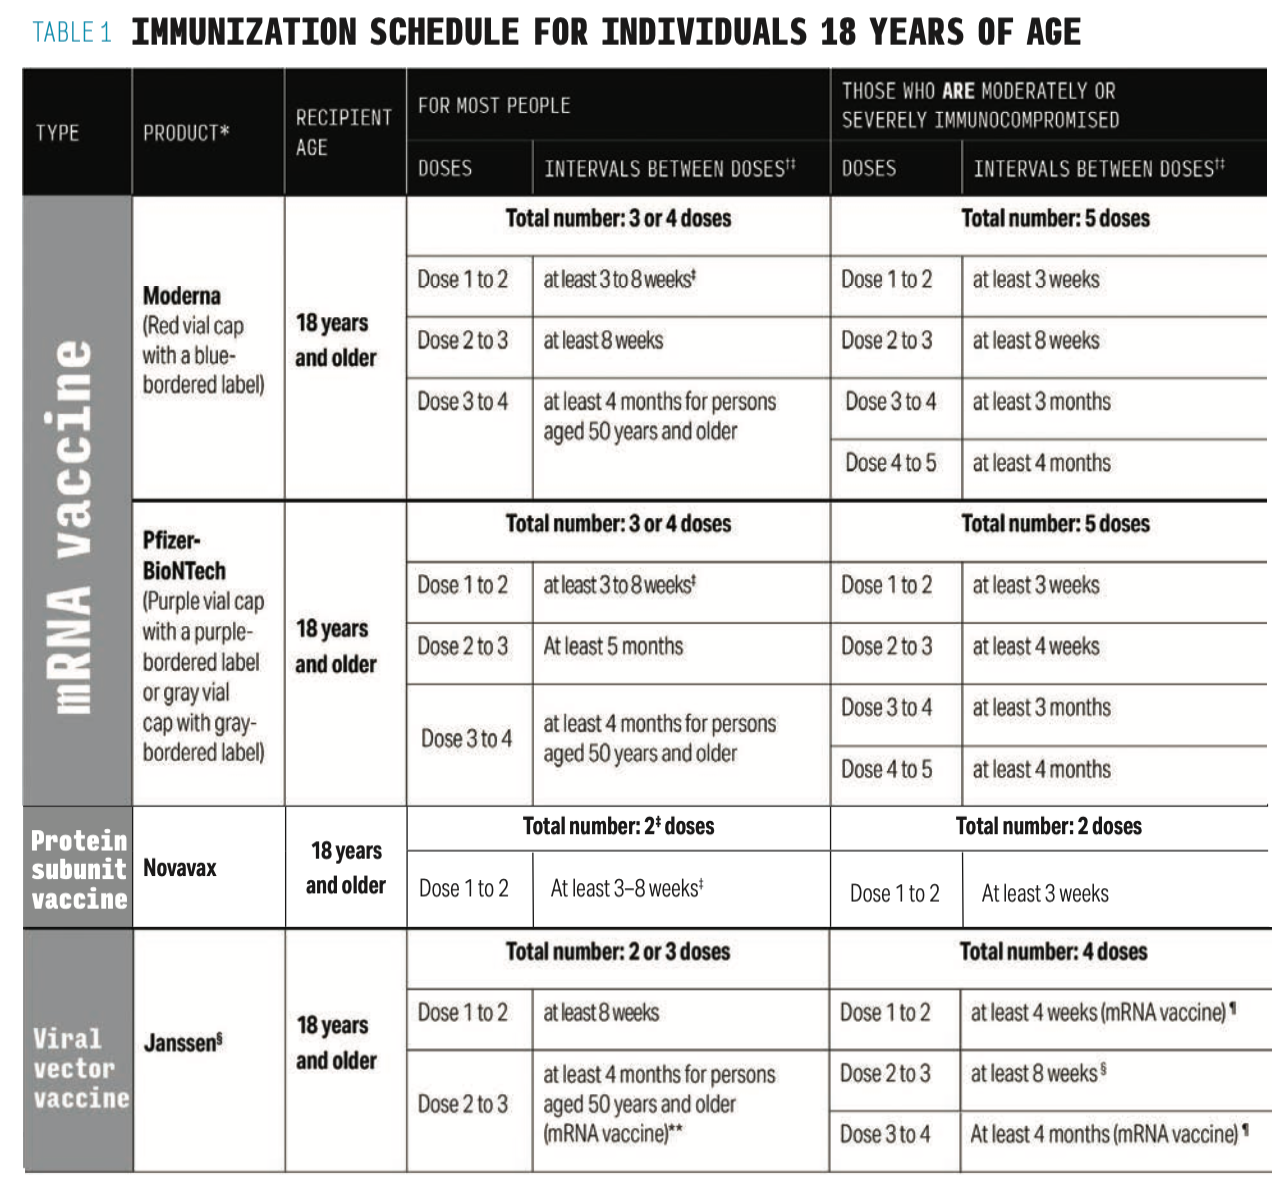 Table 1 - Immunization Schedule for Individuals 18 Years of Age